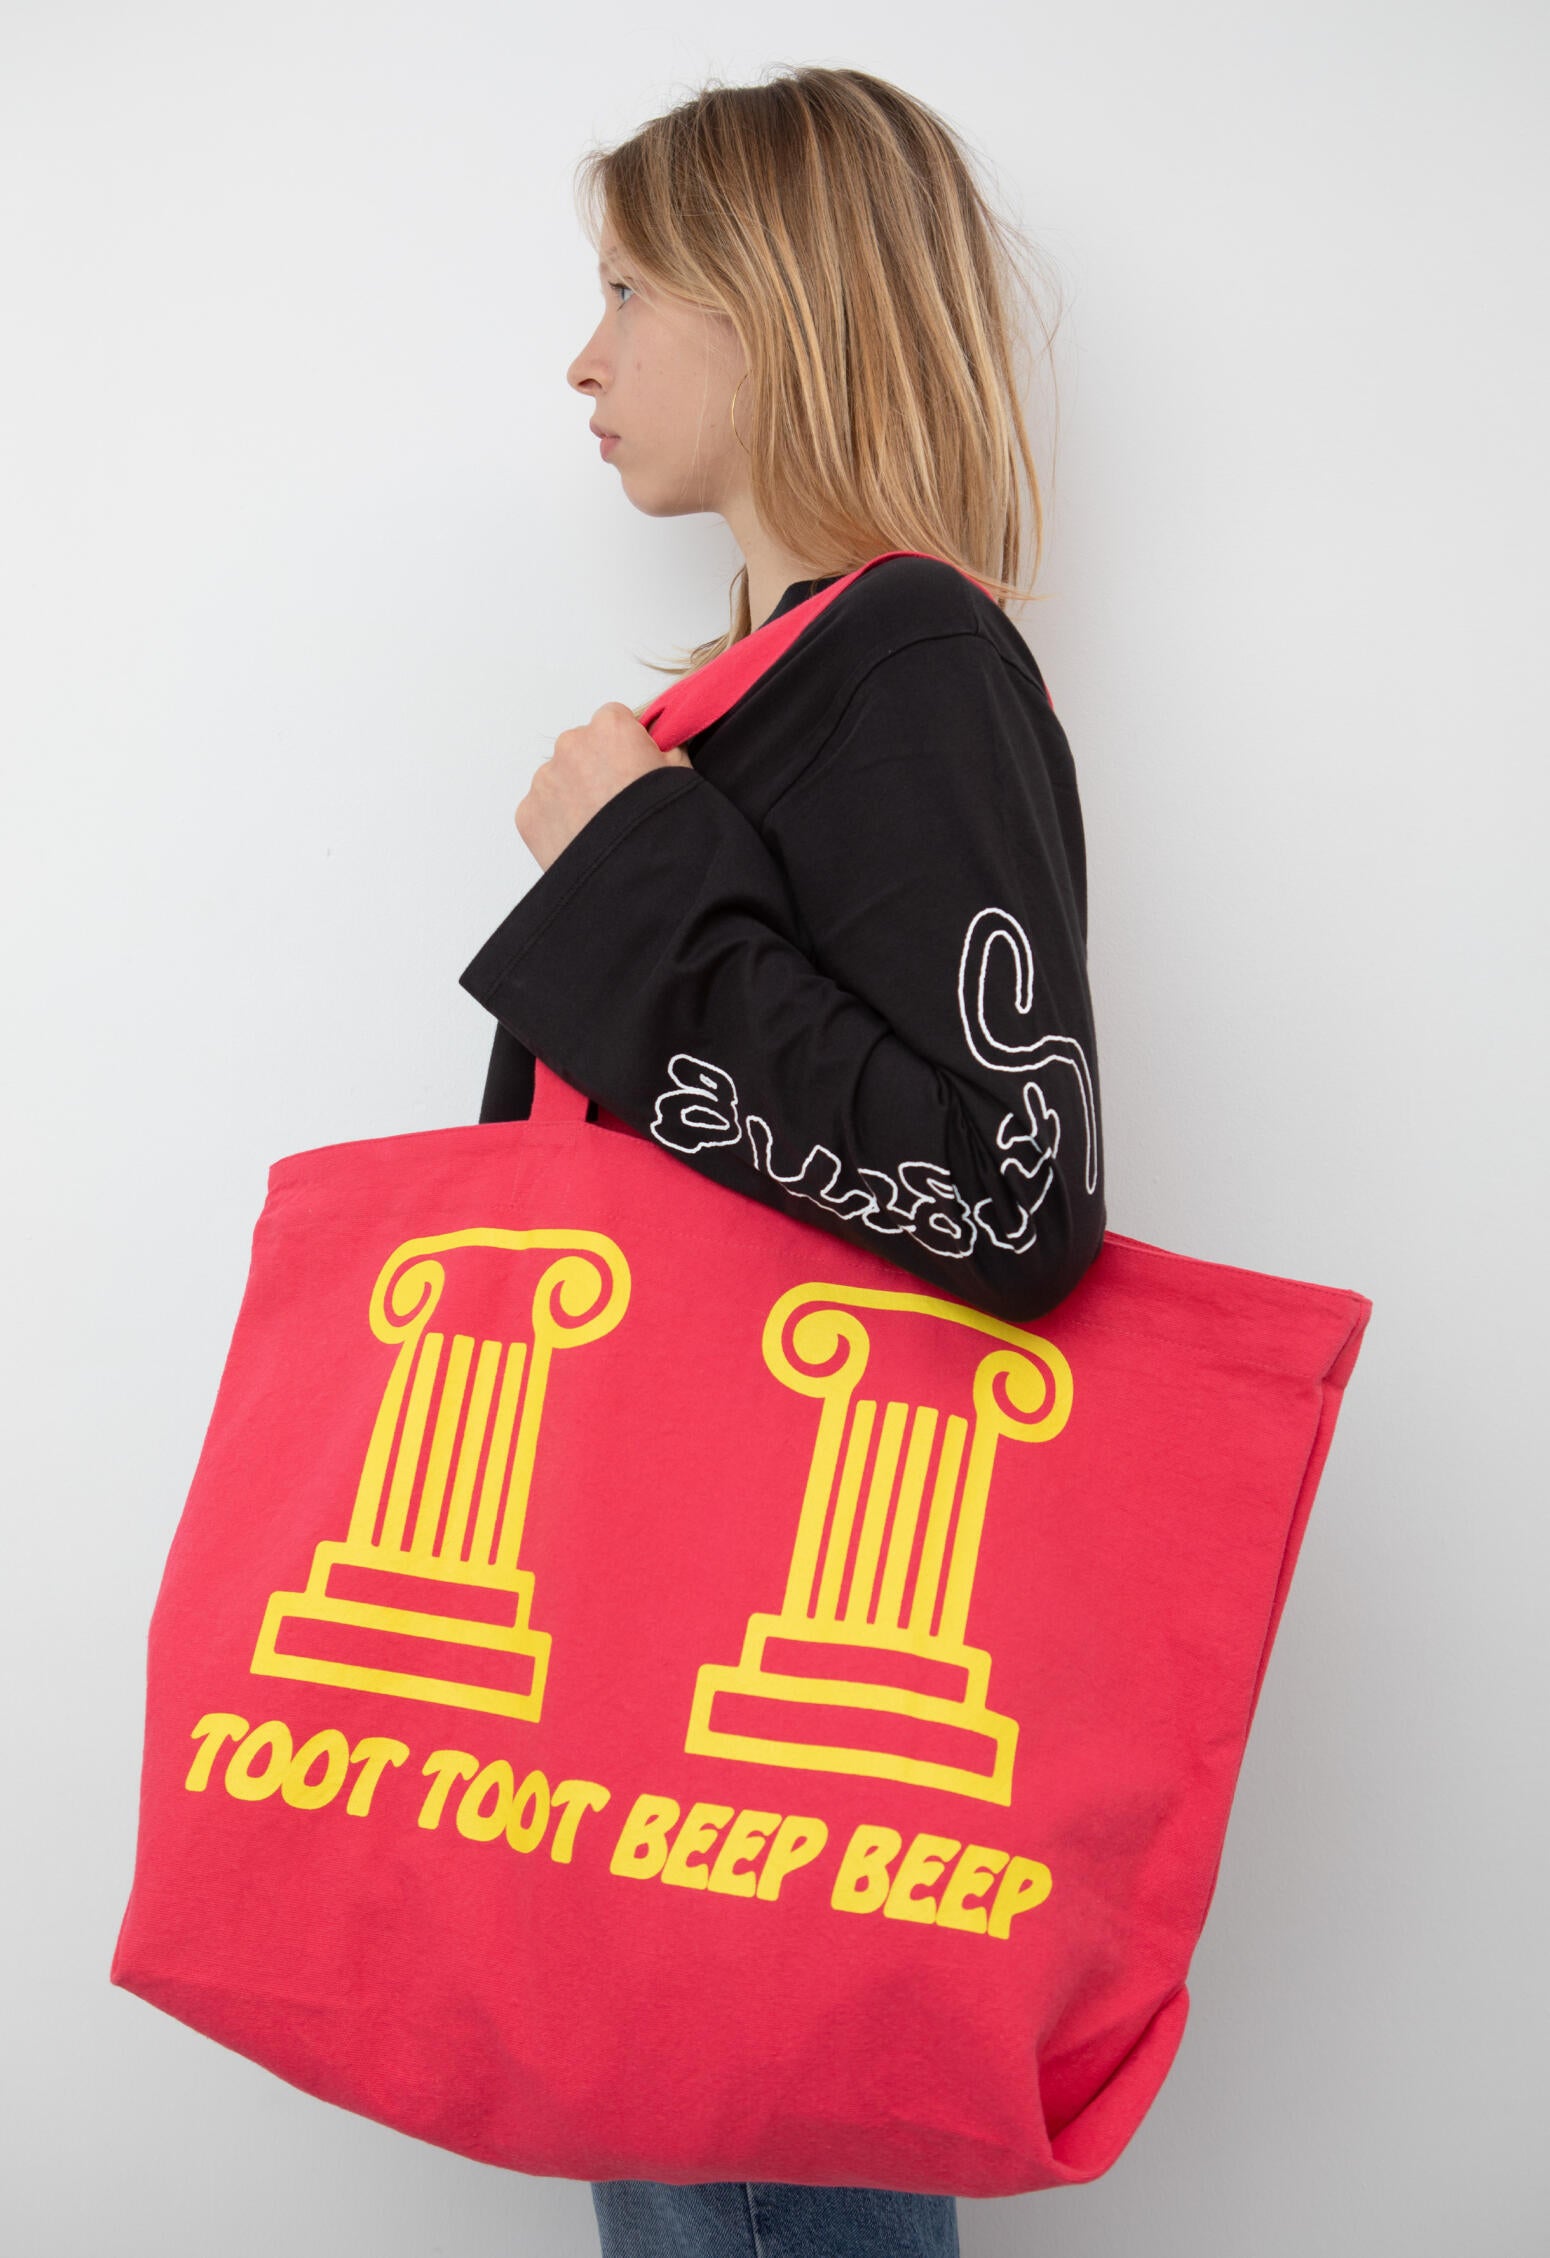 Public Possession - Toot Toot, Beep Beep Tote Bag (Red)